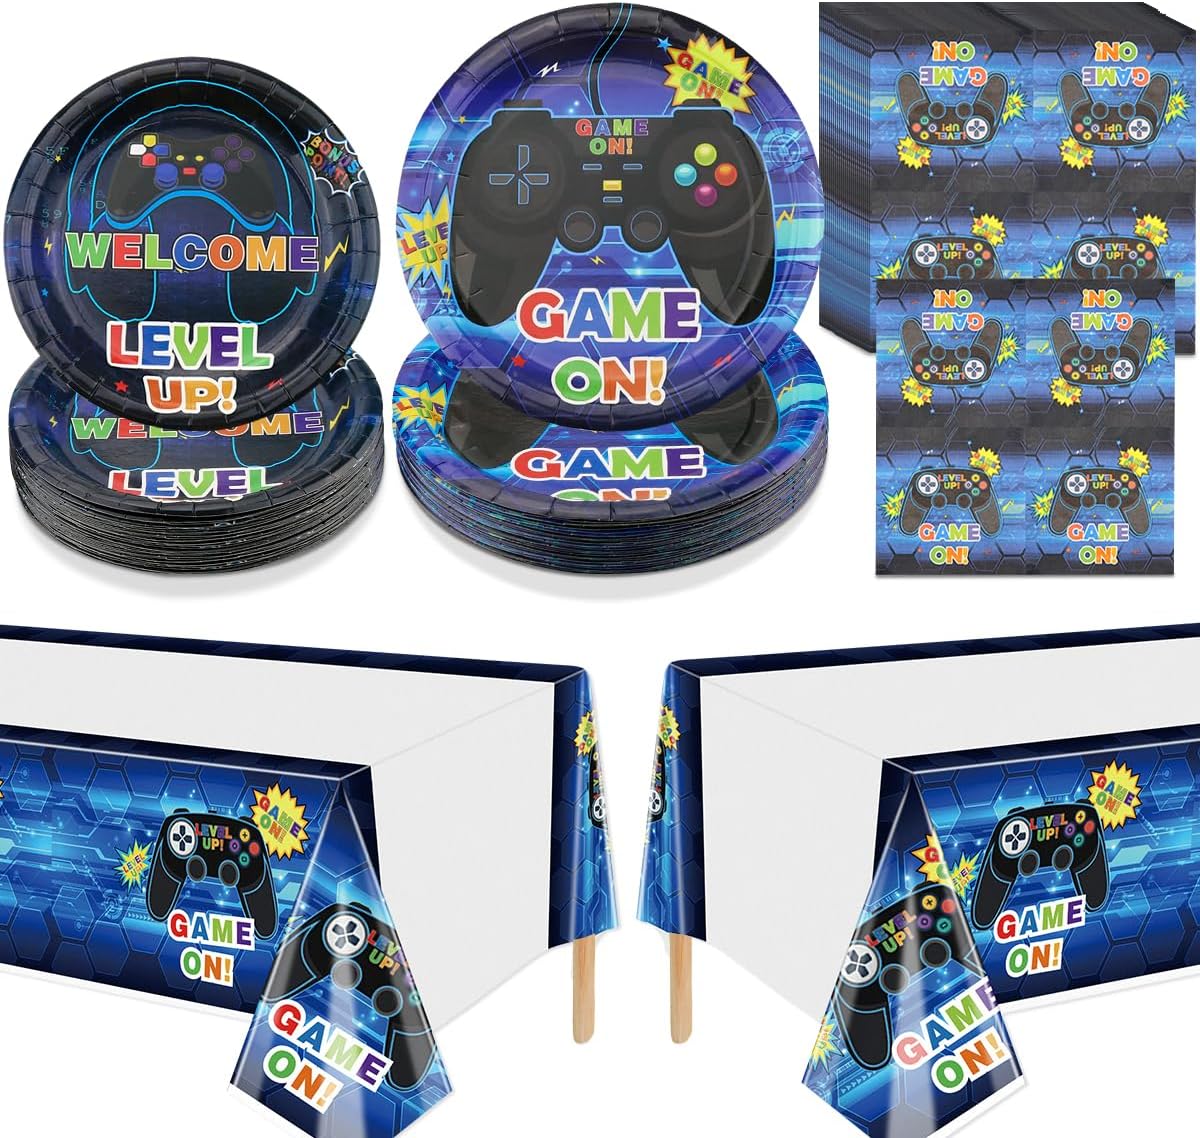 PIXHOTUL Video Game Party Decorations Review